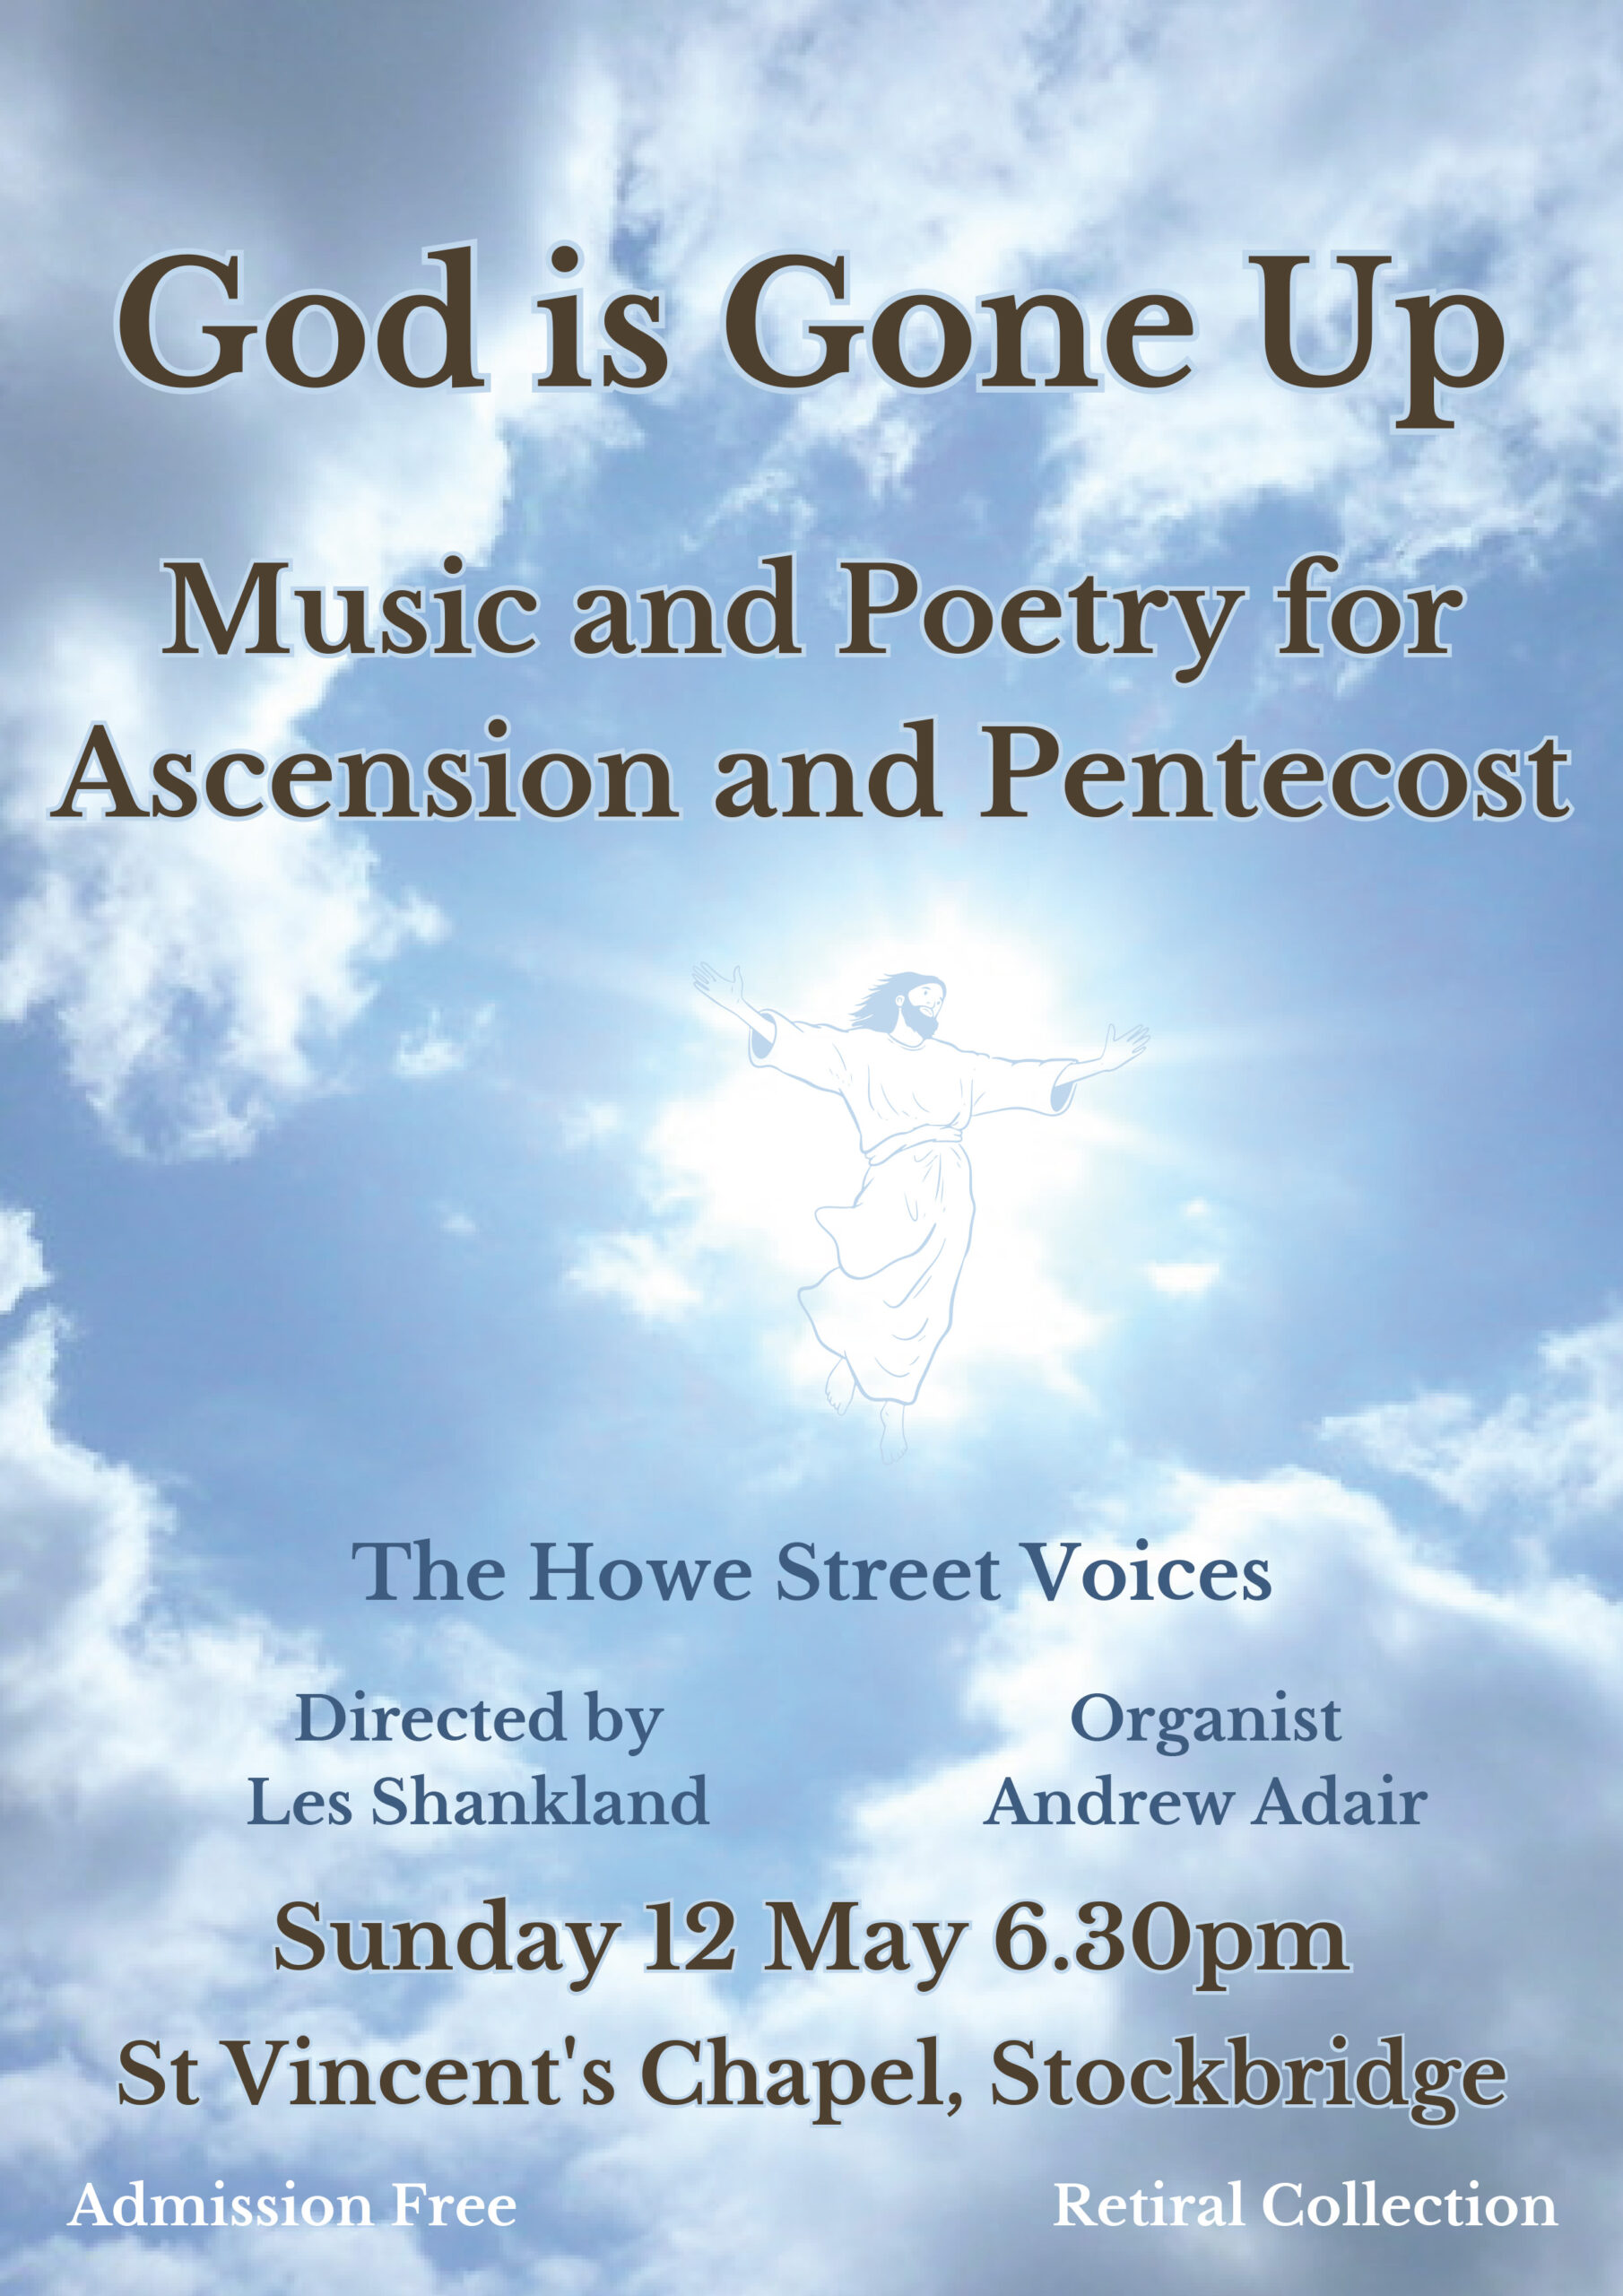 God is Gone Up - Music and Poetry for Ascension and Pentecost at 6.30pm (No Evensong)